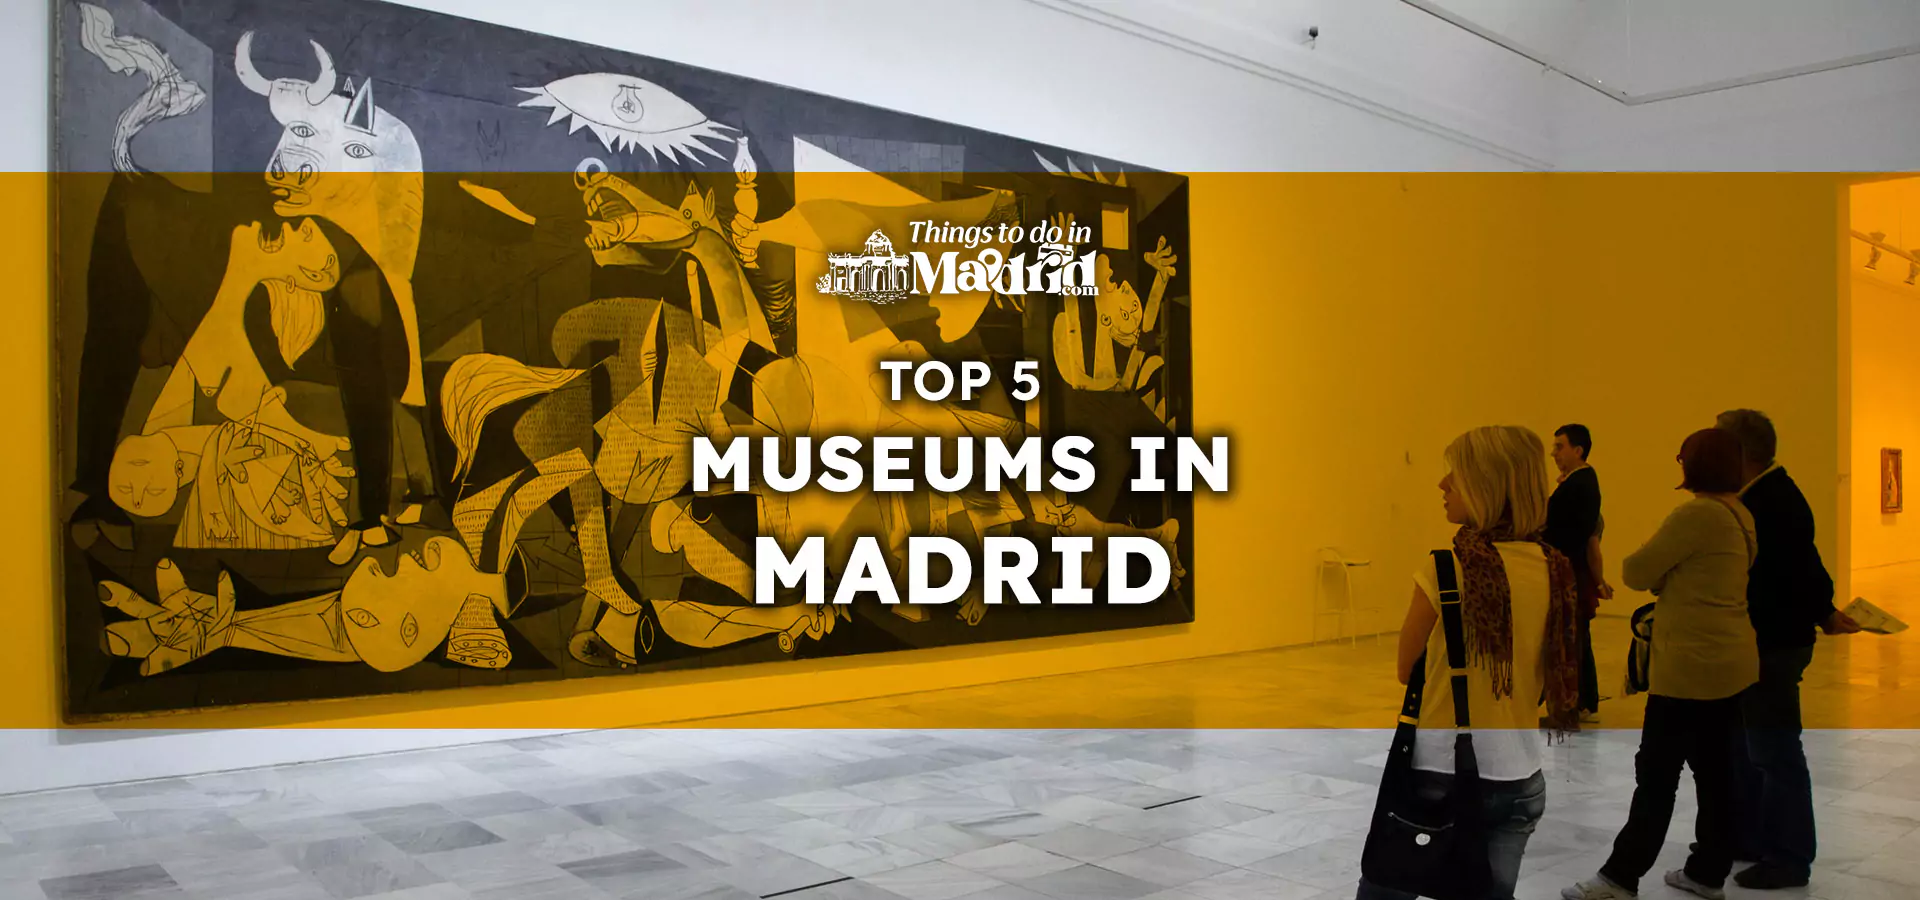 Top 5 museums in madrid